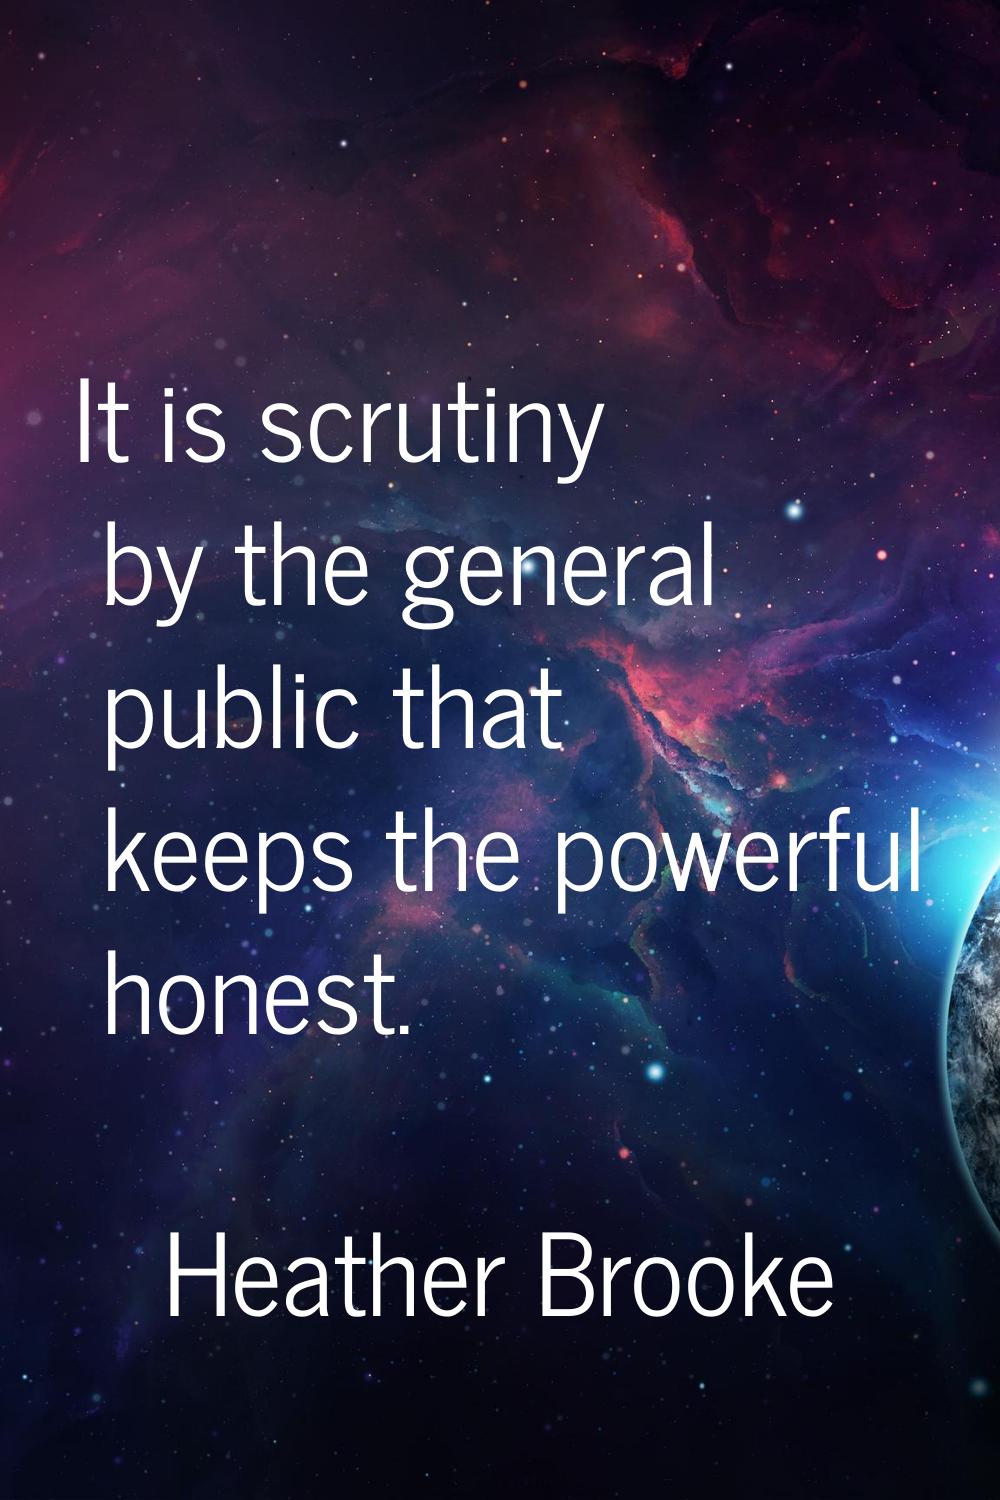 It is scrutiny by the general public that keeps the powerful honest.